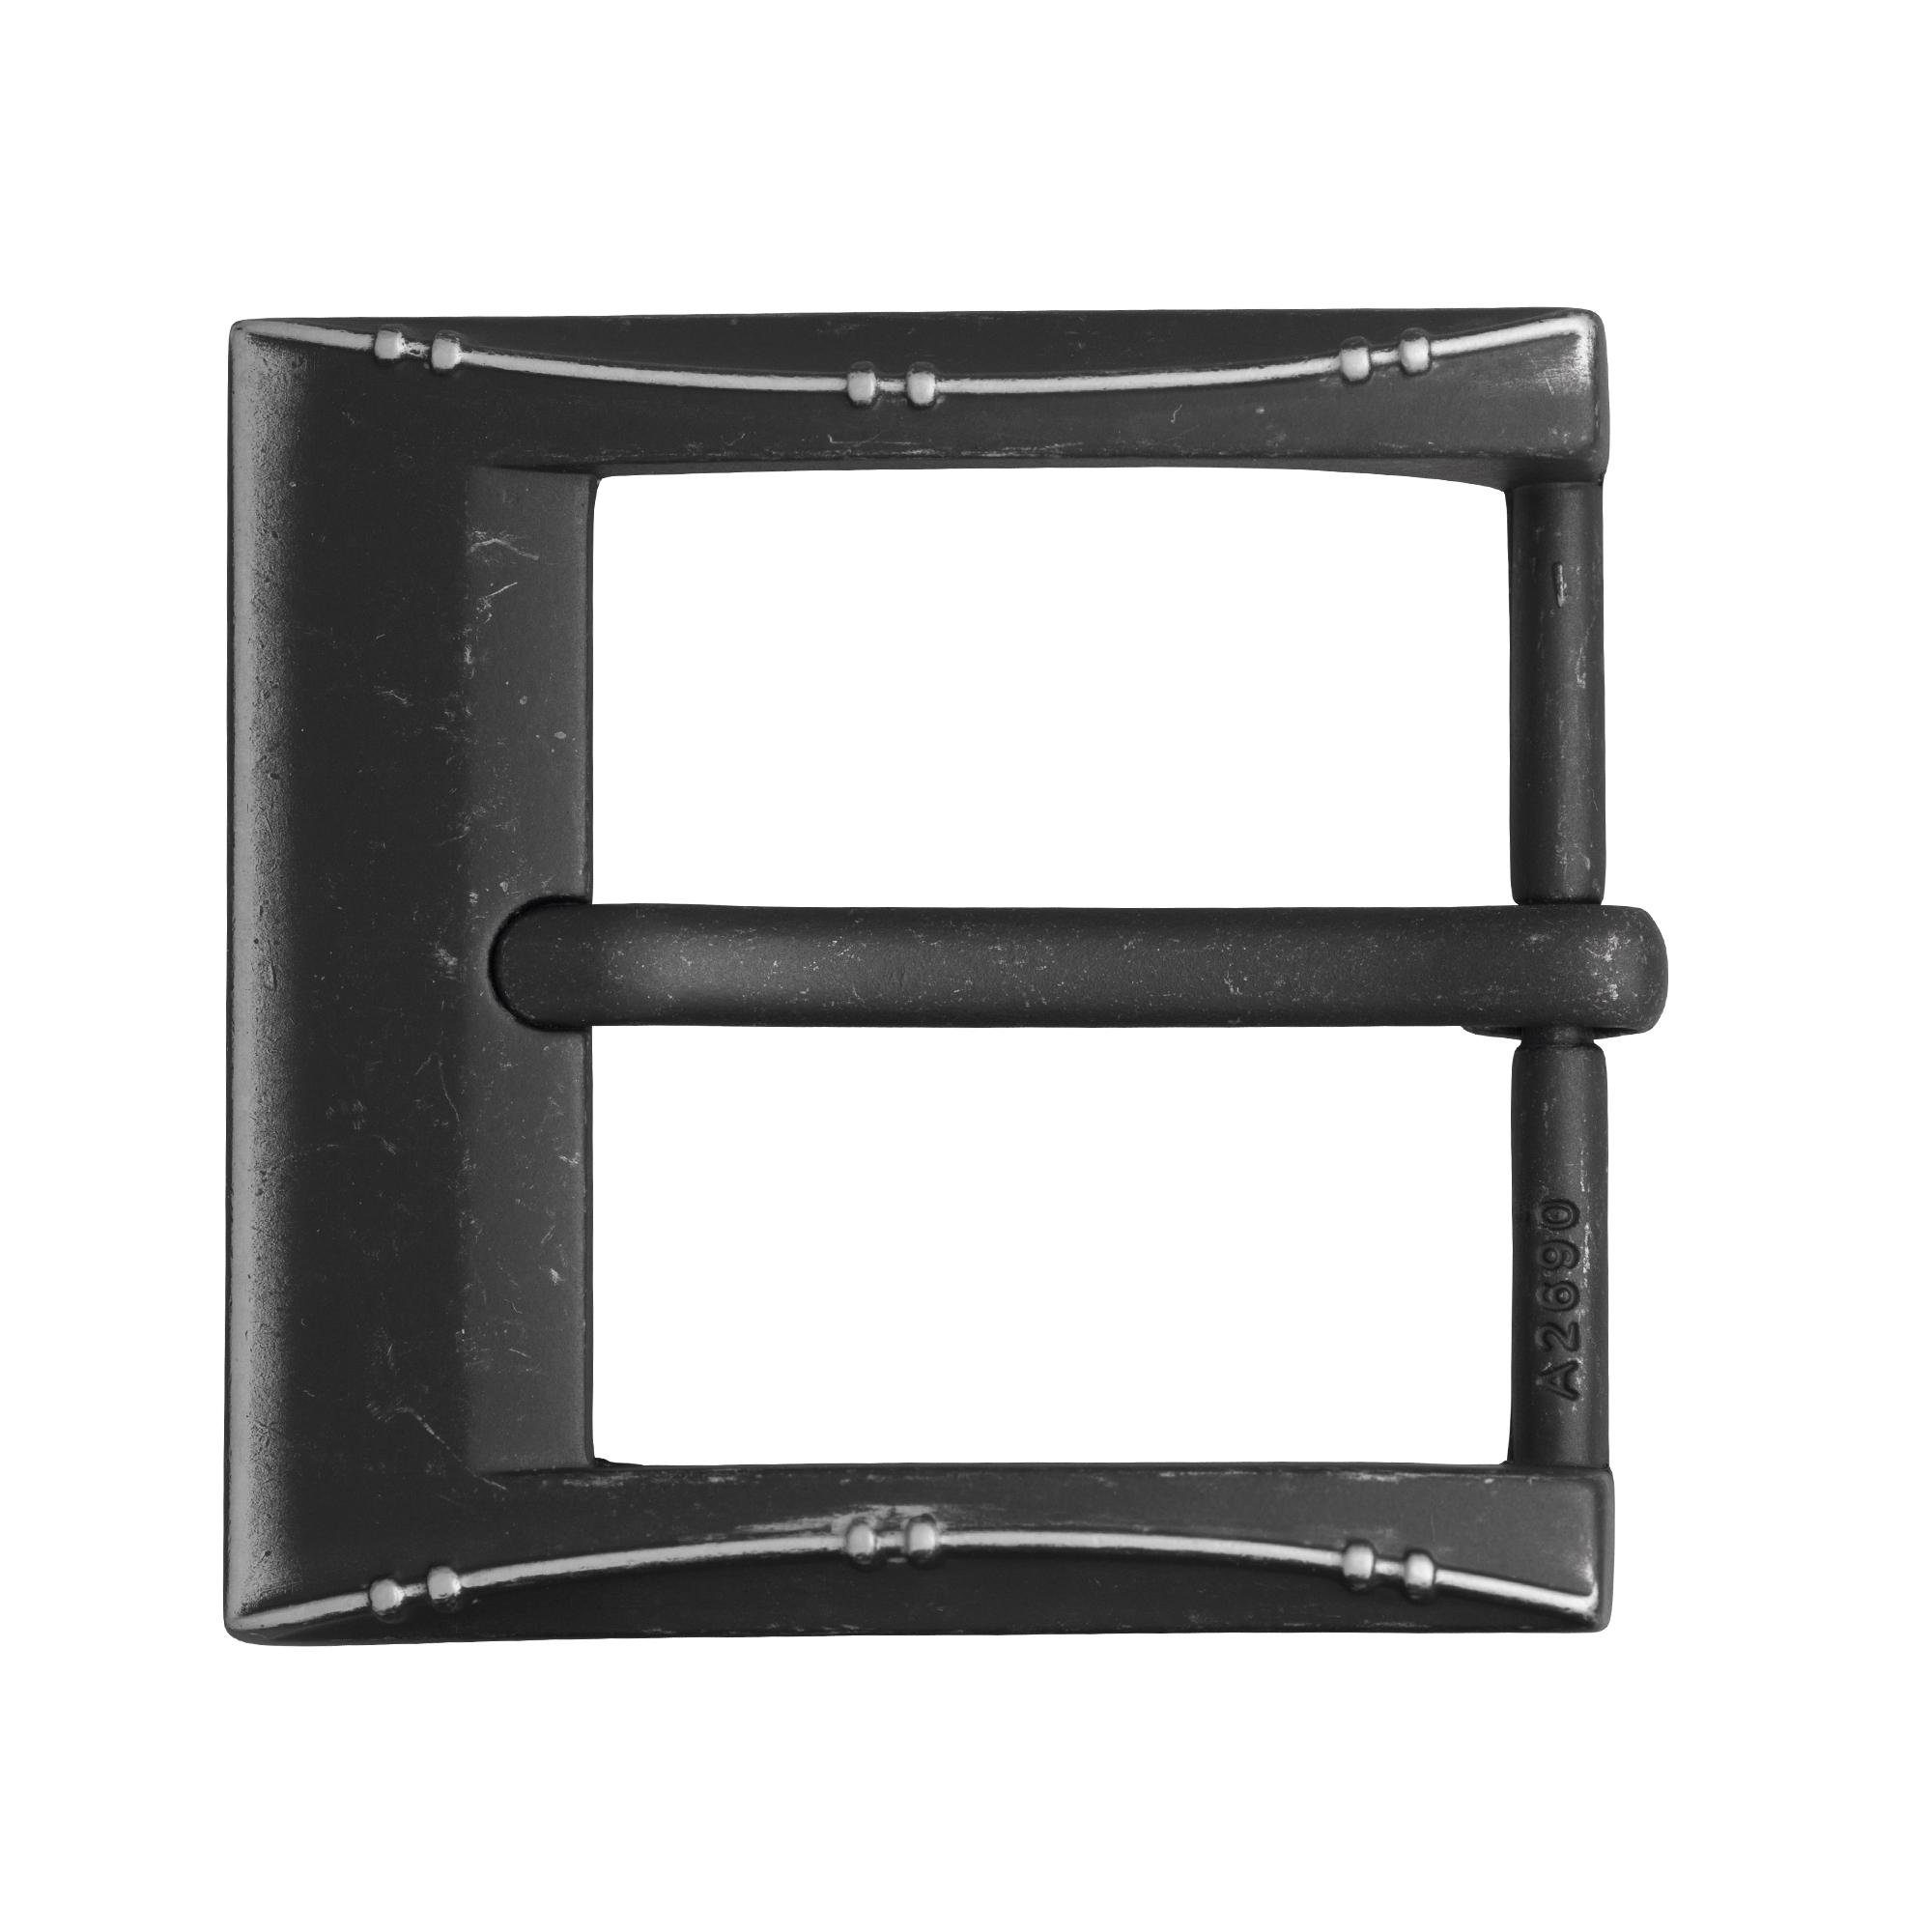 40mm Buckle Metall Angulaire 333707530020 HERMANO Silber FREDERIC - - Gürtelschnalle